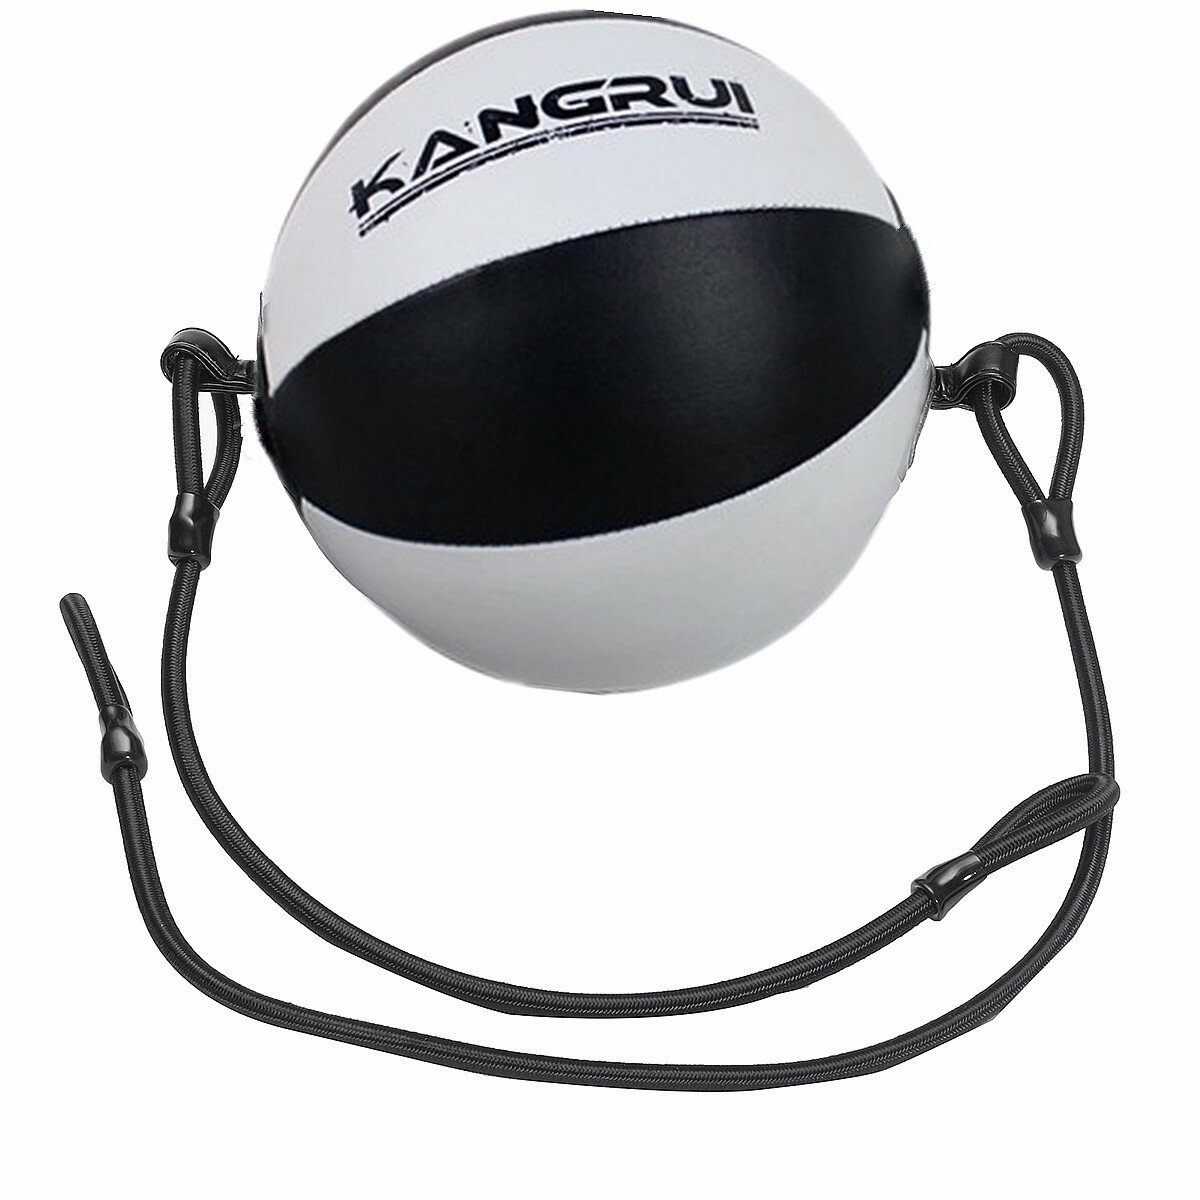 leather training speed boxing ball child adult workout punching bag Sale - www.bagssaleusa.com